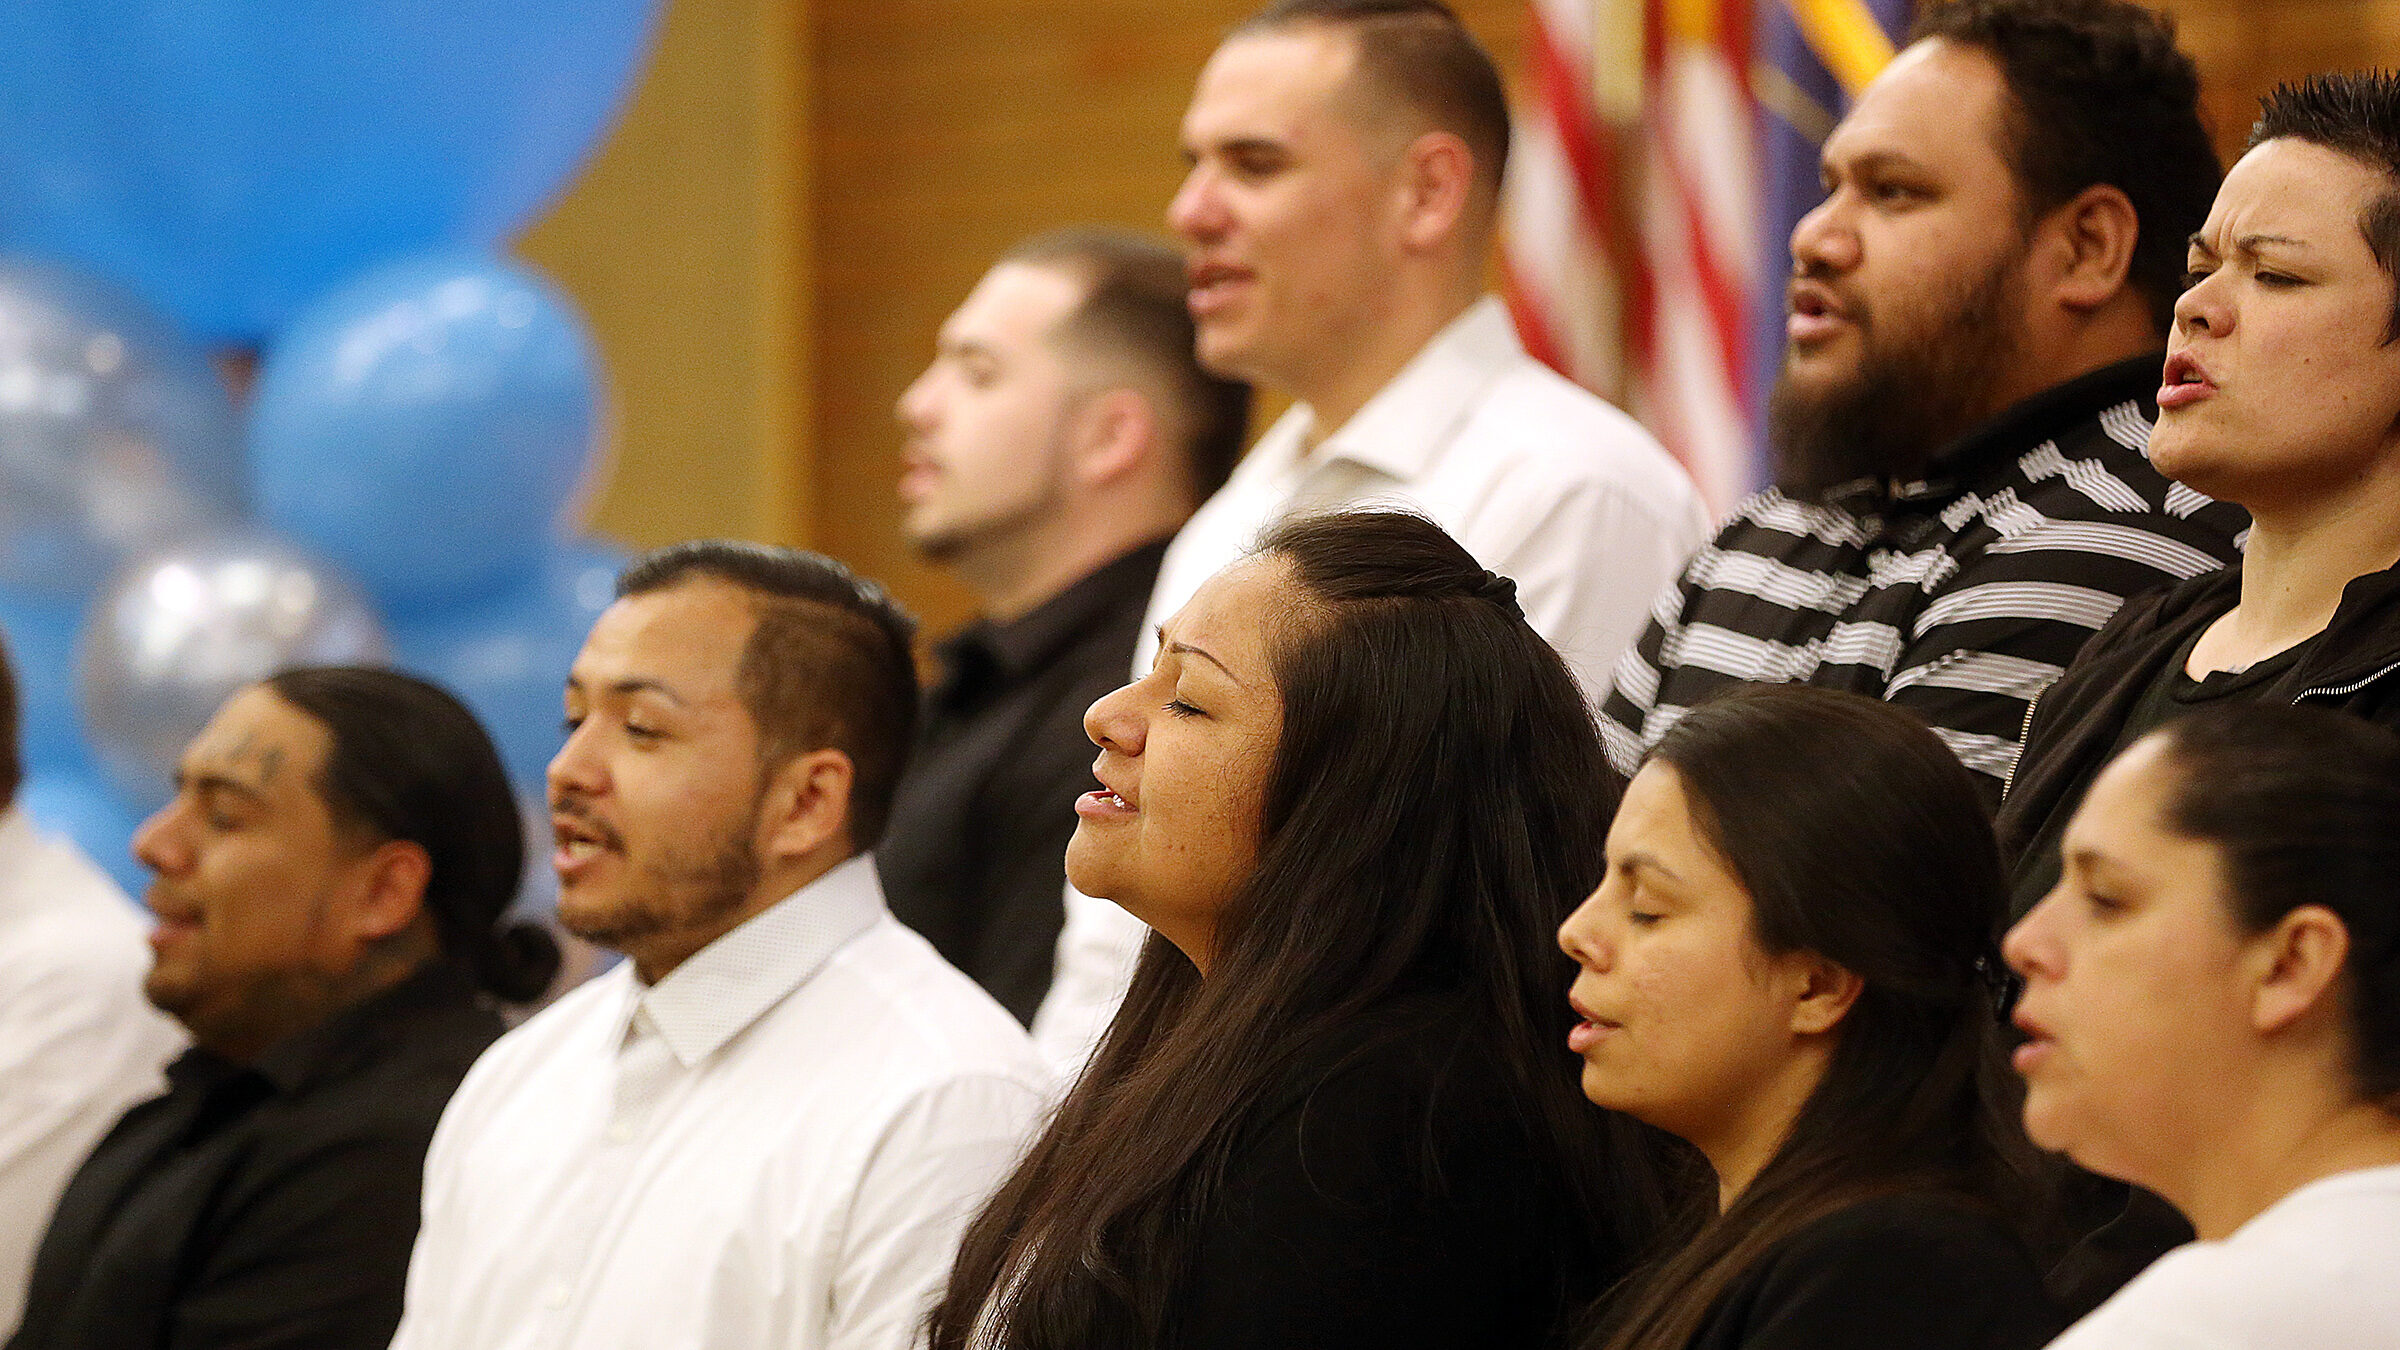 a choir sings, a new religious study explored likeability of different faiths...